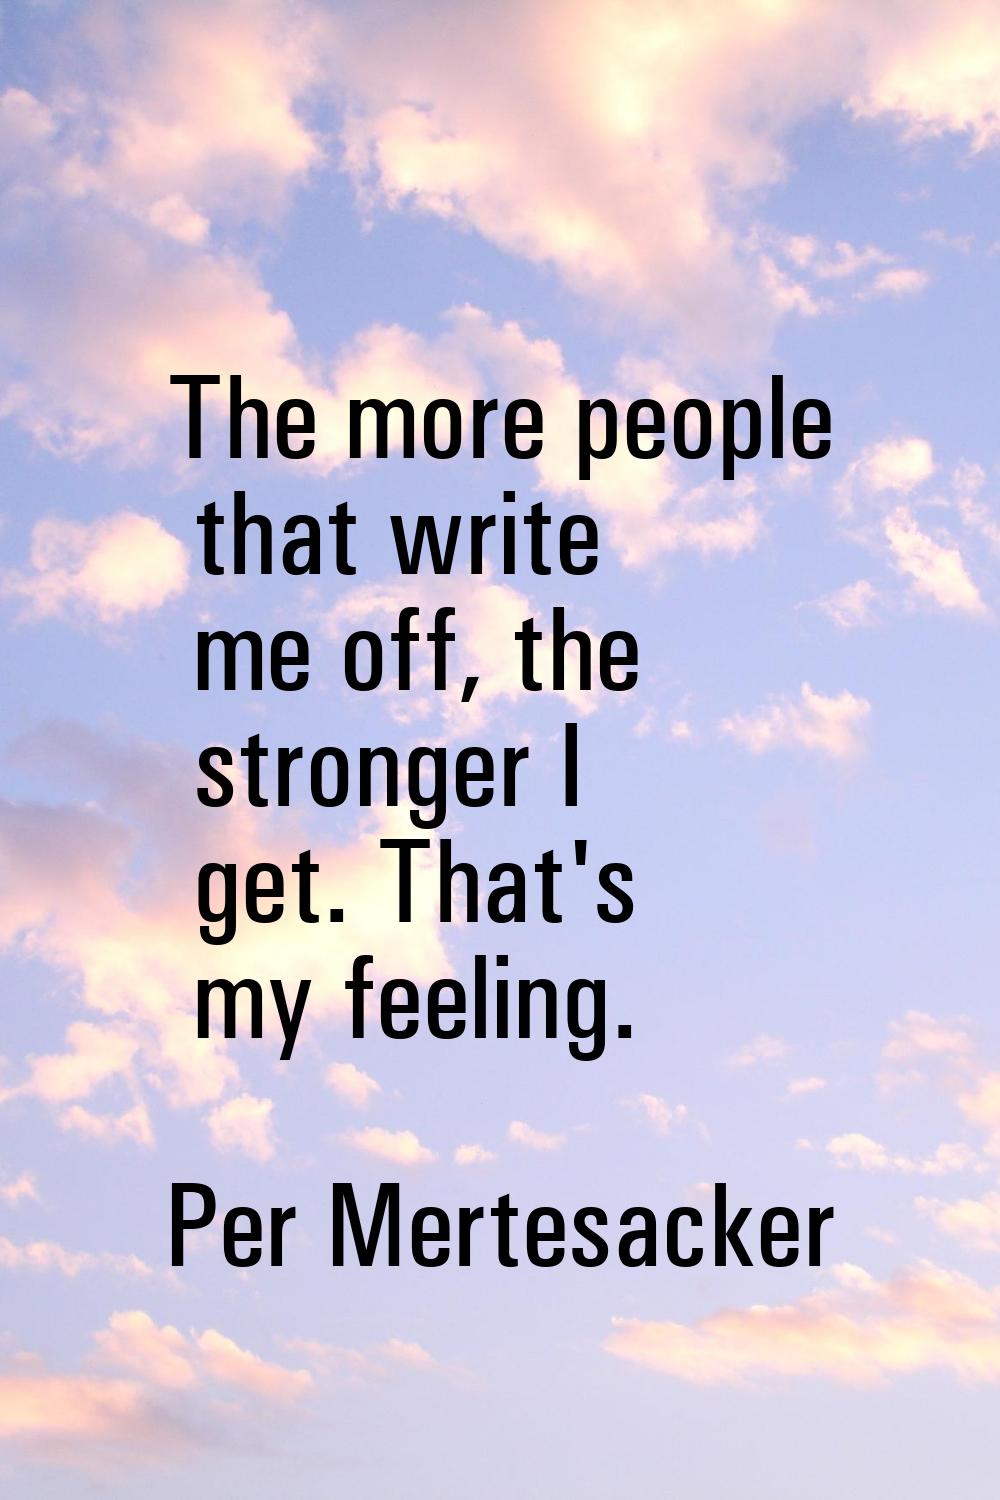 The more people that write me off, the stronger I get. That's my feeling.